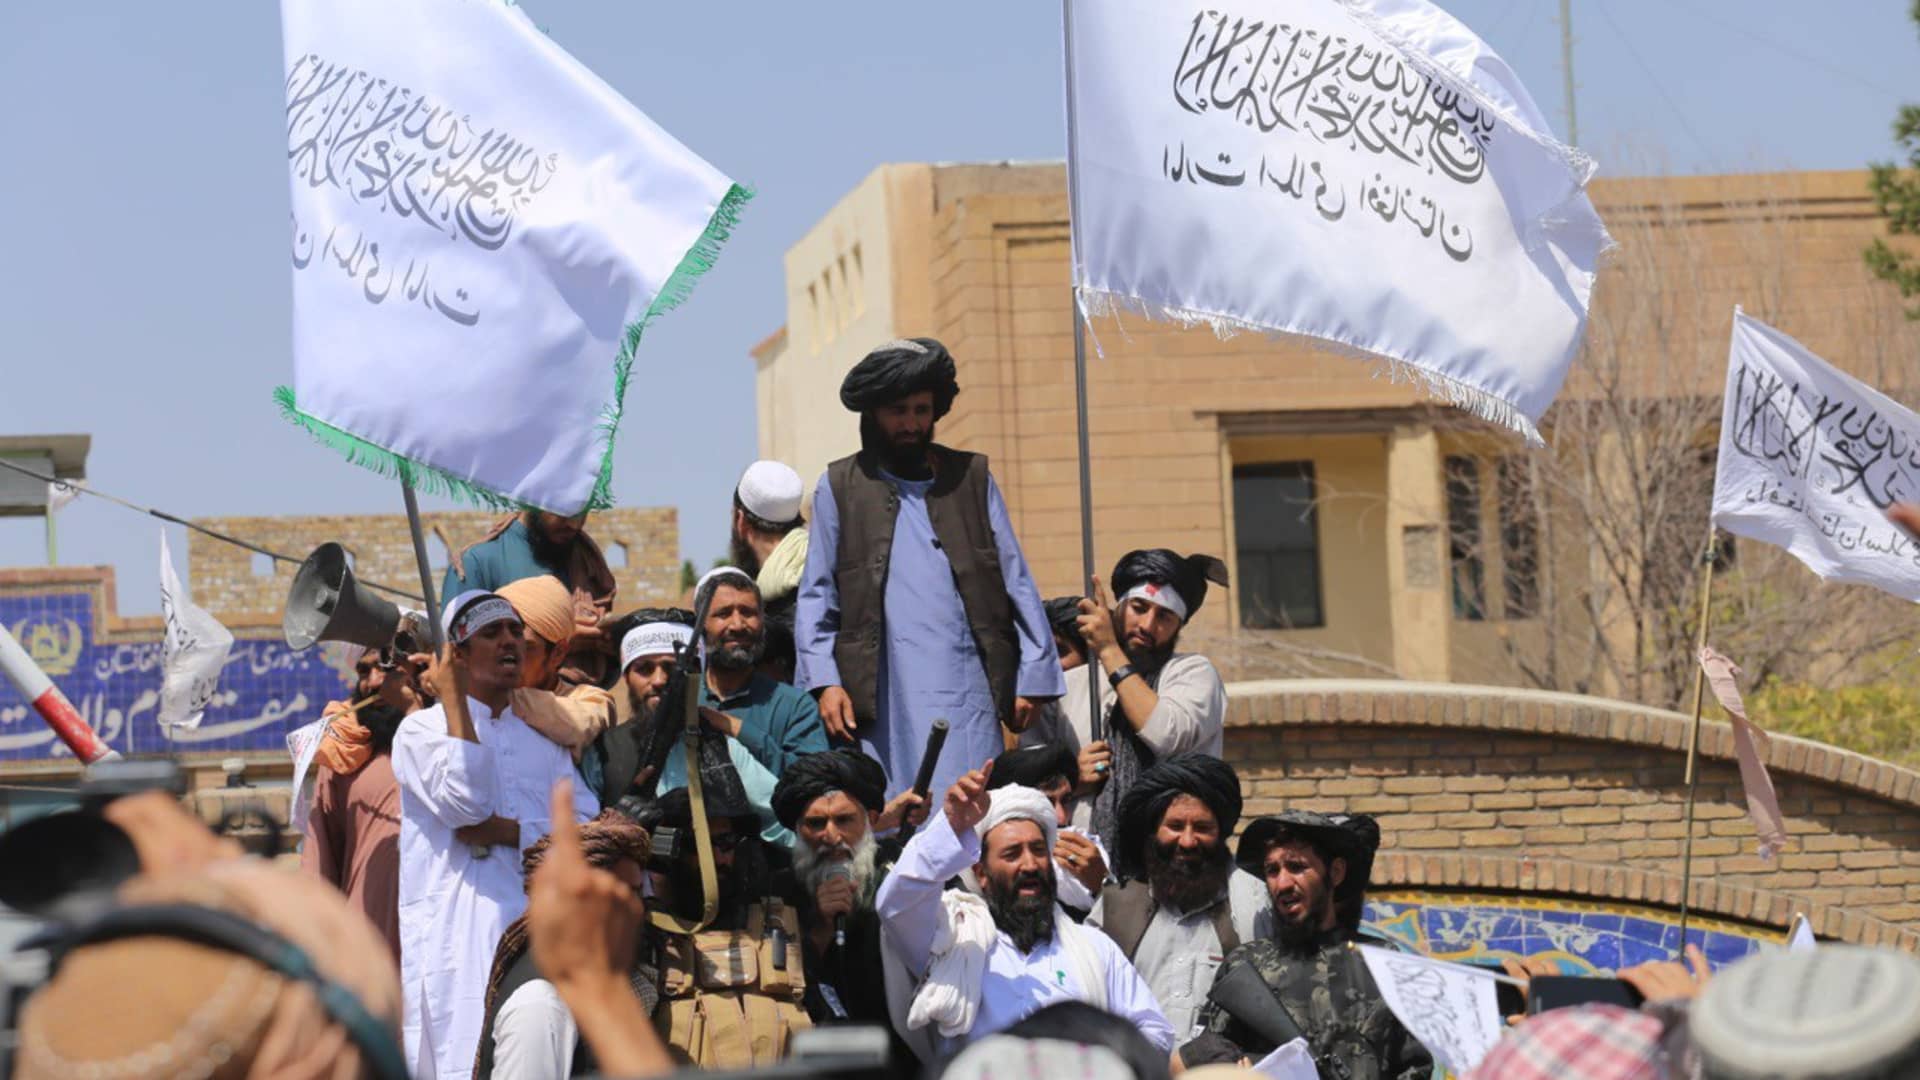 Taliban members gather and make speeches in front of Herat governorate after the completion of the U.S. withdrawal from Afghanistan, in Herat, Afghanistan on August 31, 2021.